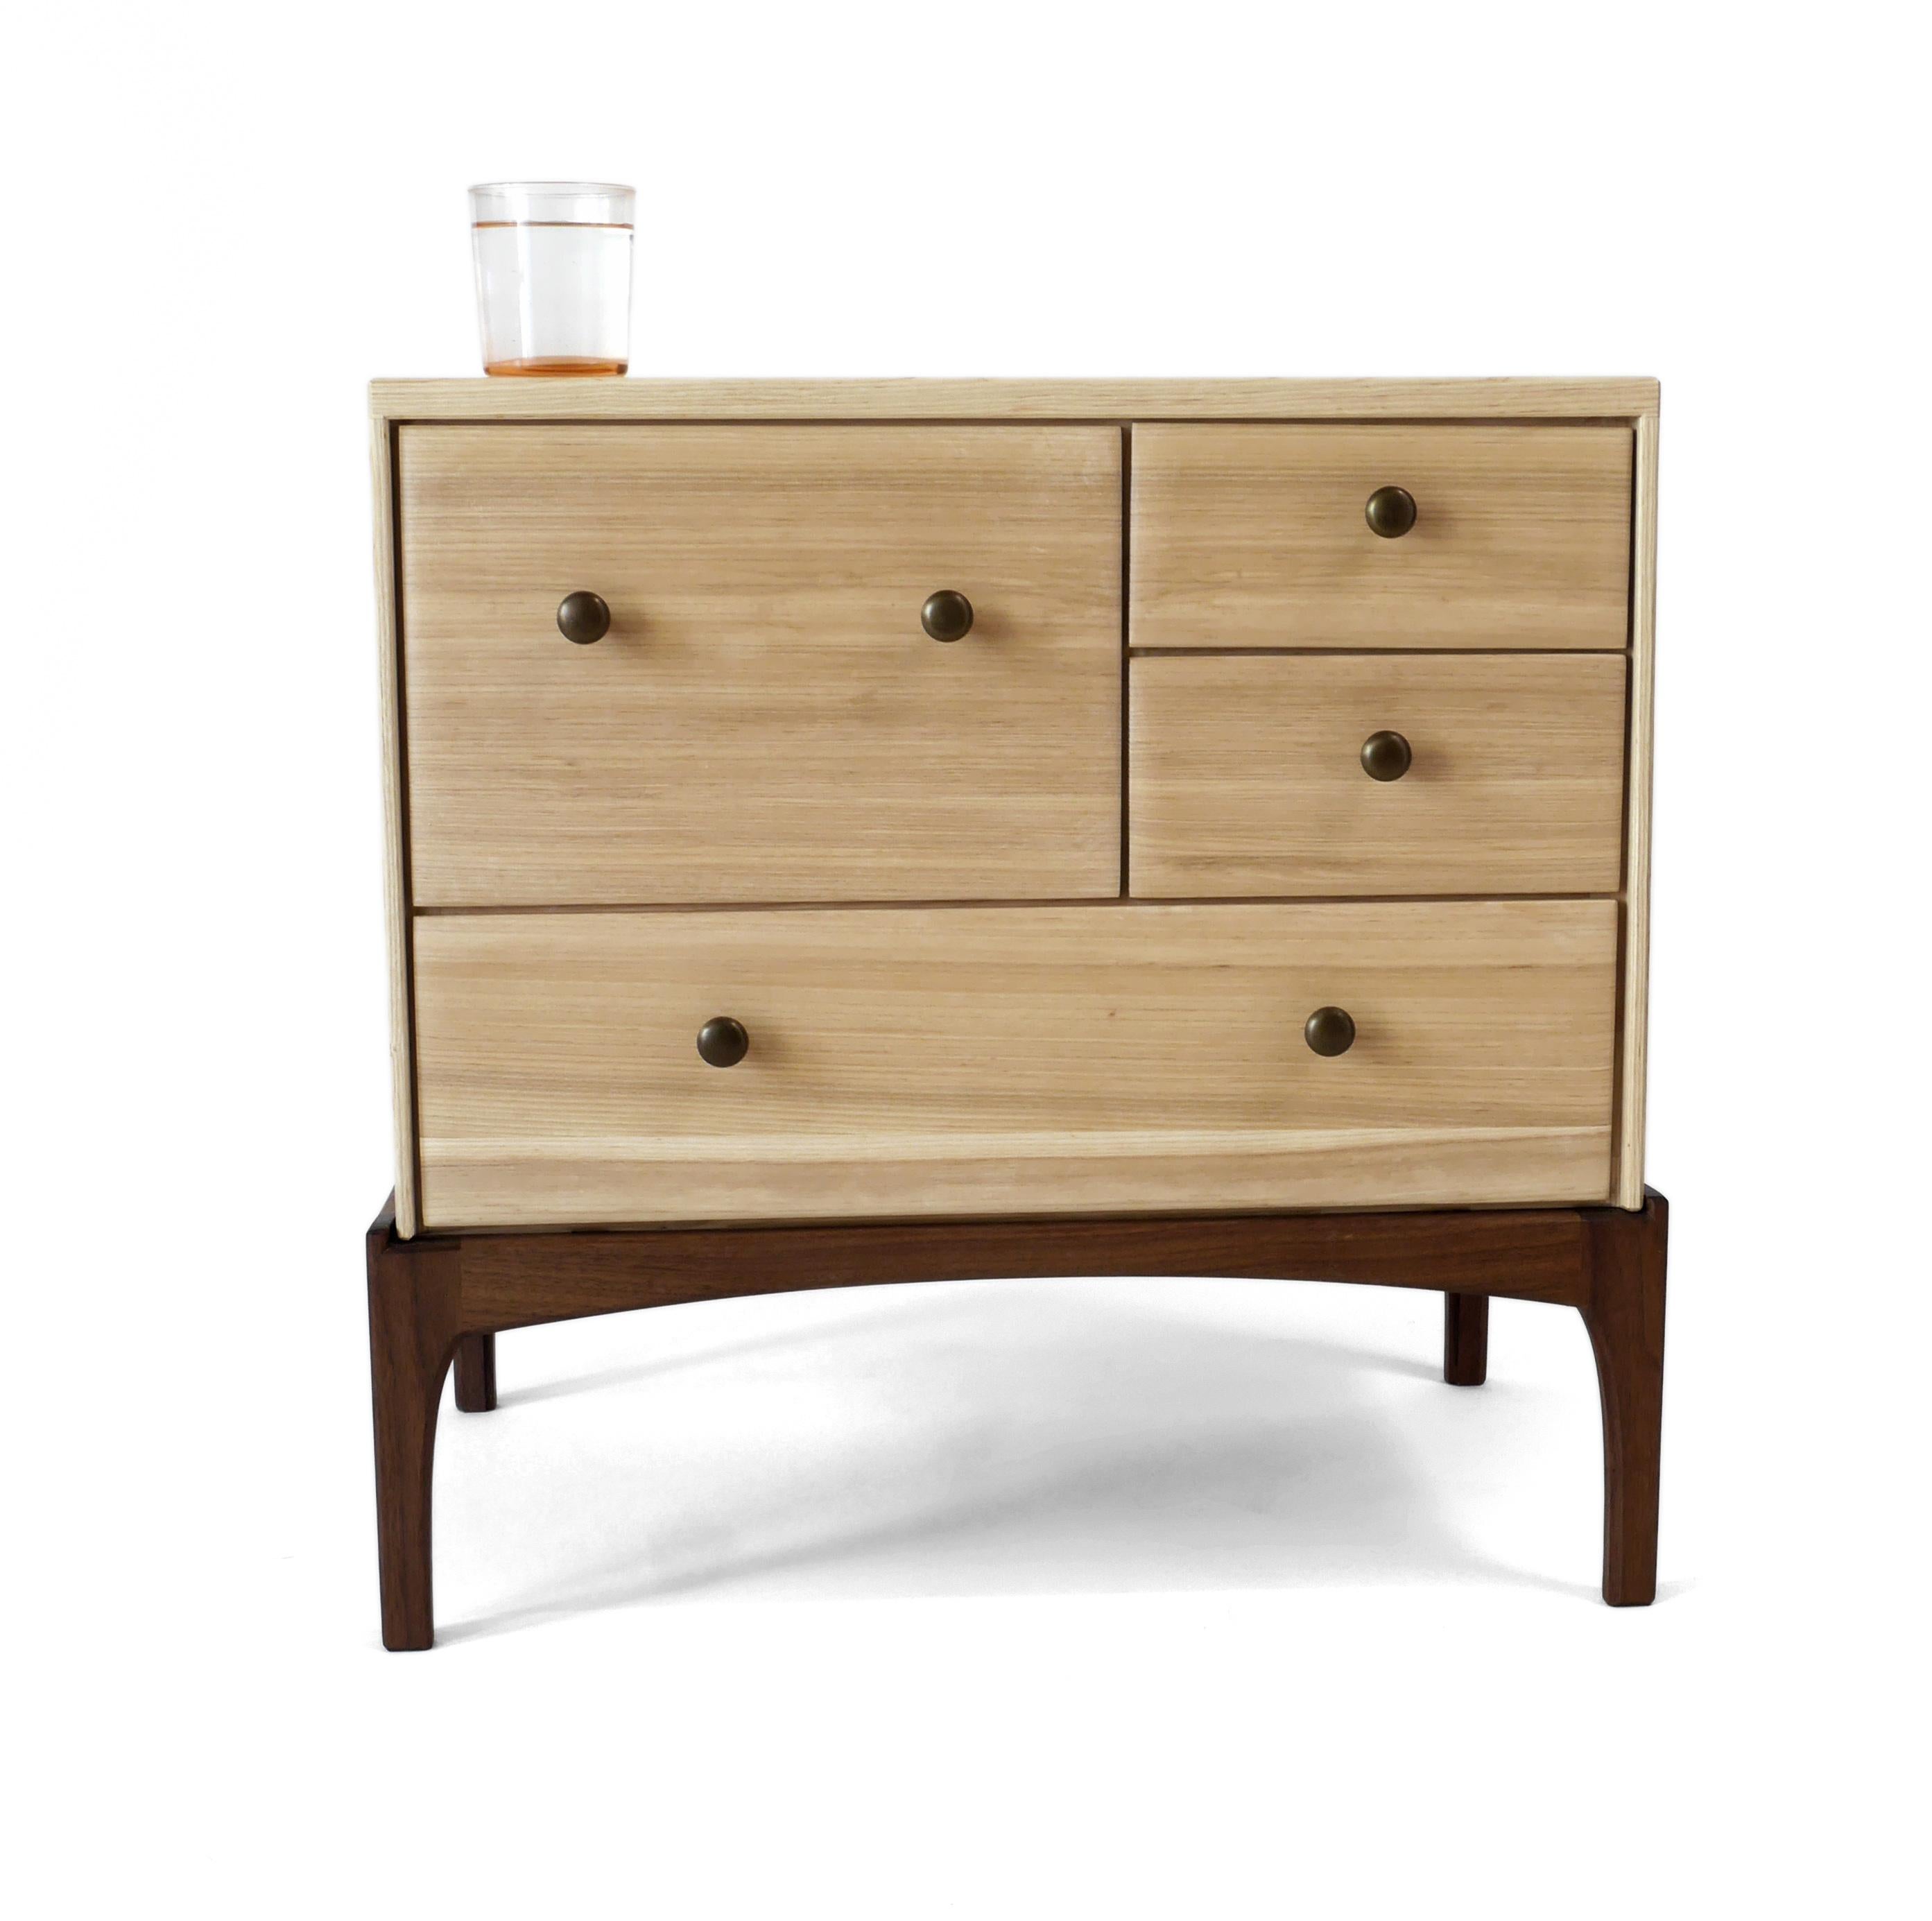 The stunning Arora Nightstand is built of solid ash hardwood with a black walnut stand. It has four drawers that all run on the finest soft closing ball bearing glides and is built with exposed joinery that has been carefully designed for beauty and